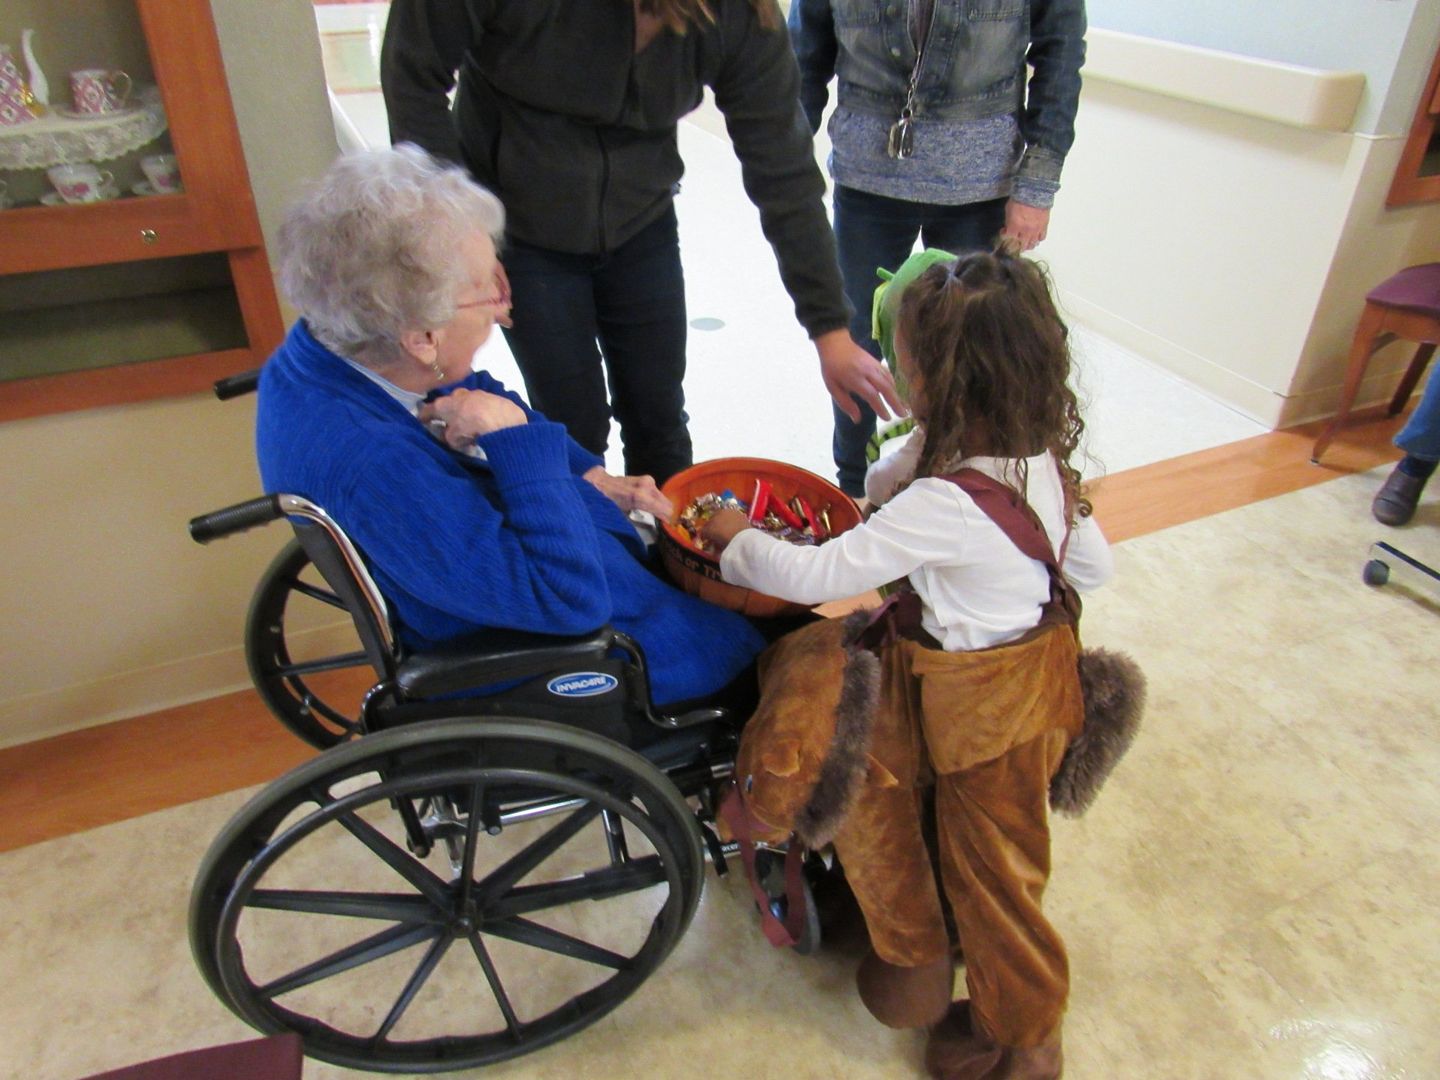 Elder handing out candy at Halloween at Lenawee Medical Care Facility in Adrian, MI